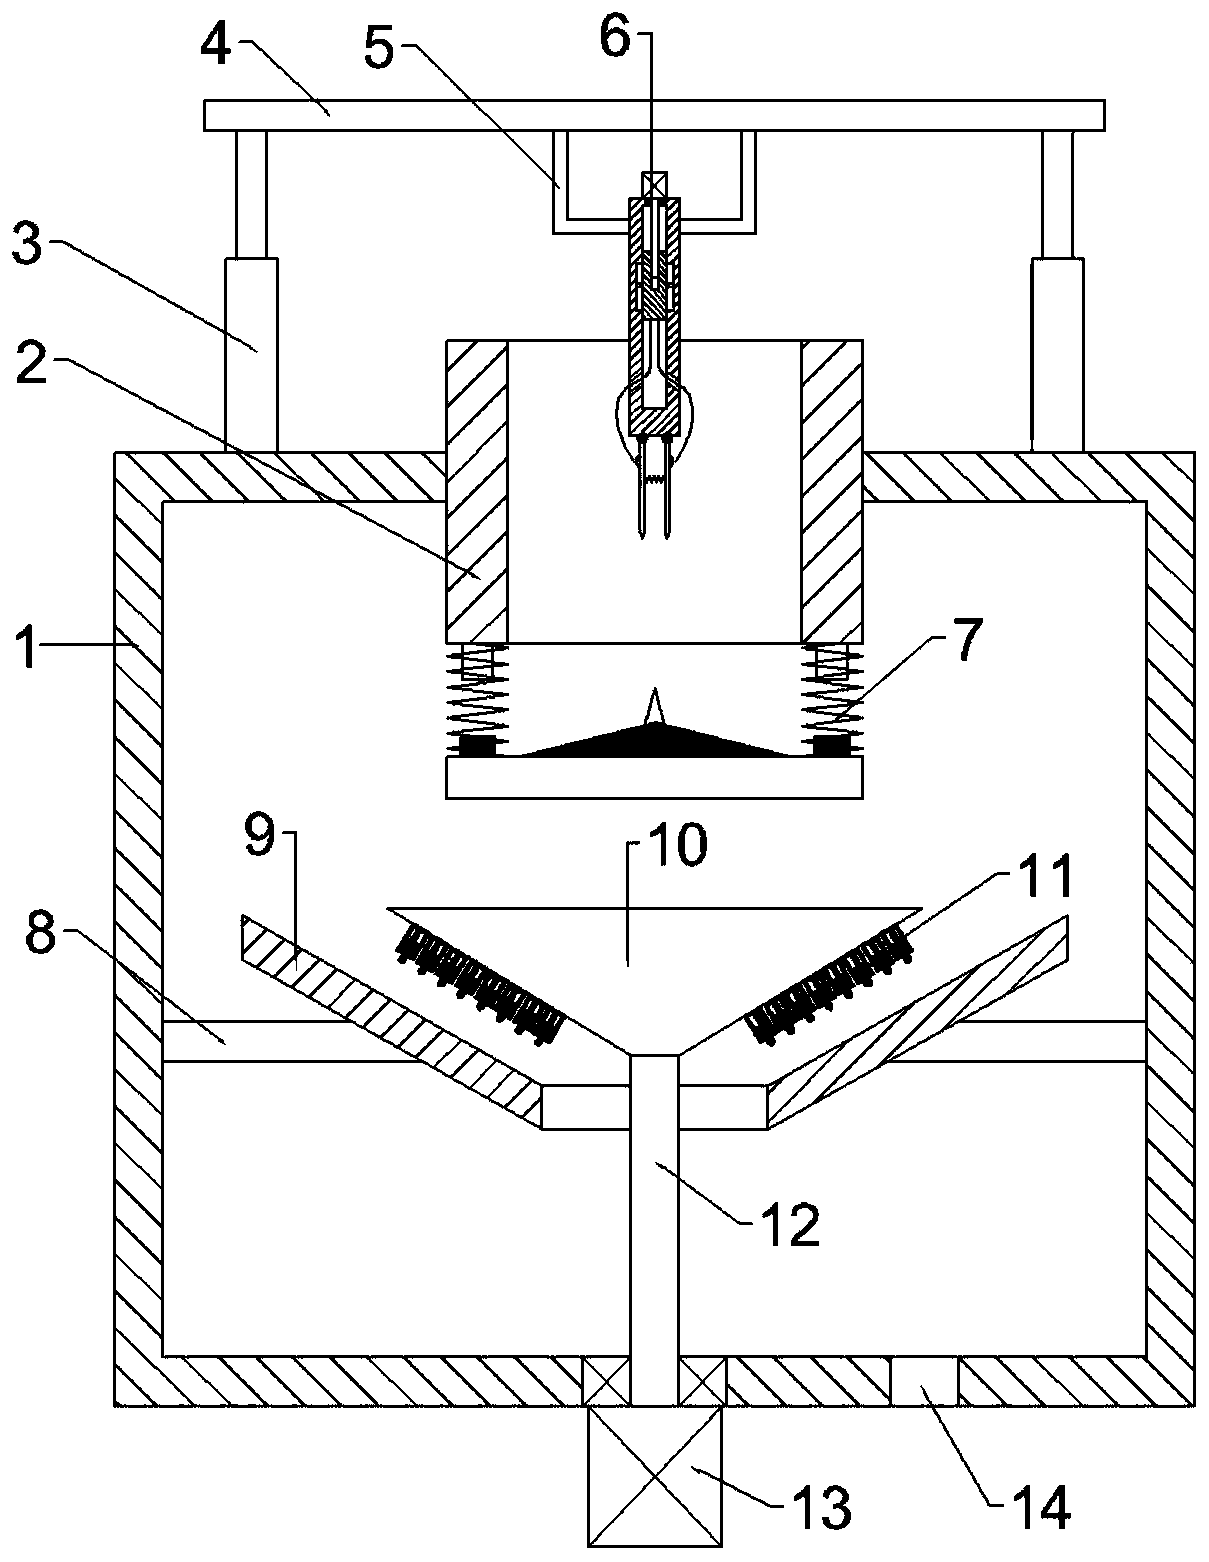 A kind of extended type quick splitting device for garlic